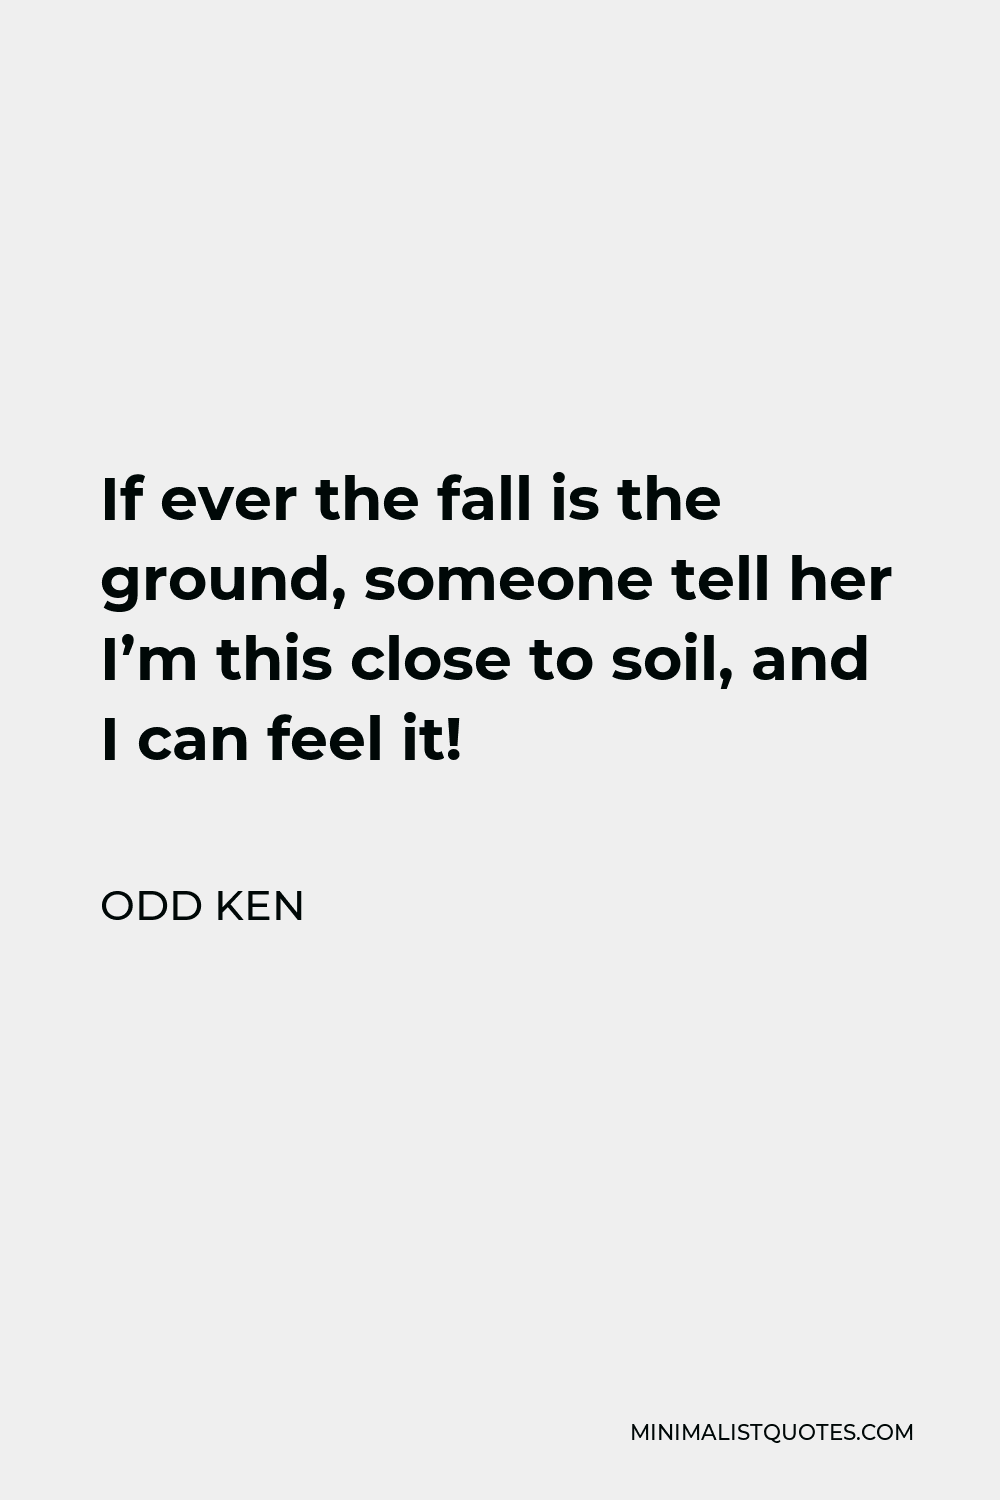 Odd Ken Quote - If ever the fall is the ground, someone tell her I’m this close to soil, and I can feel it!